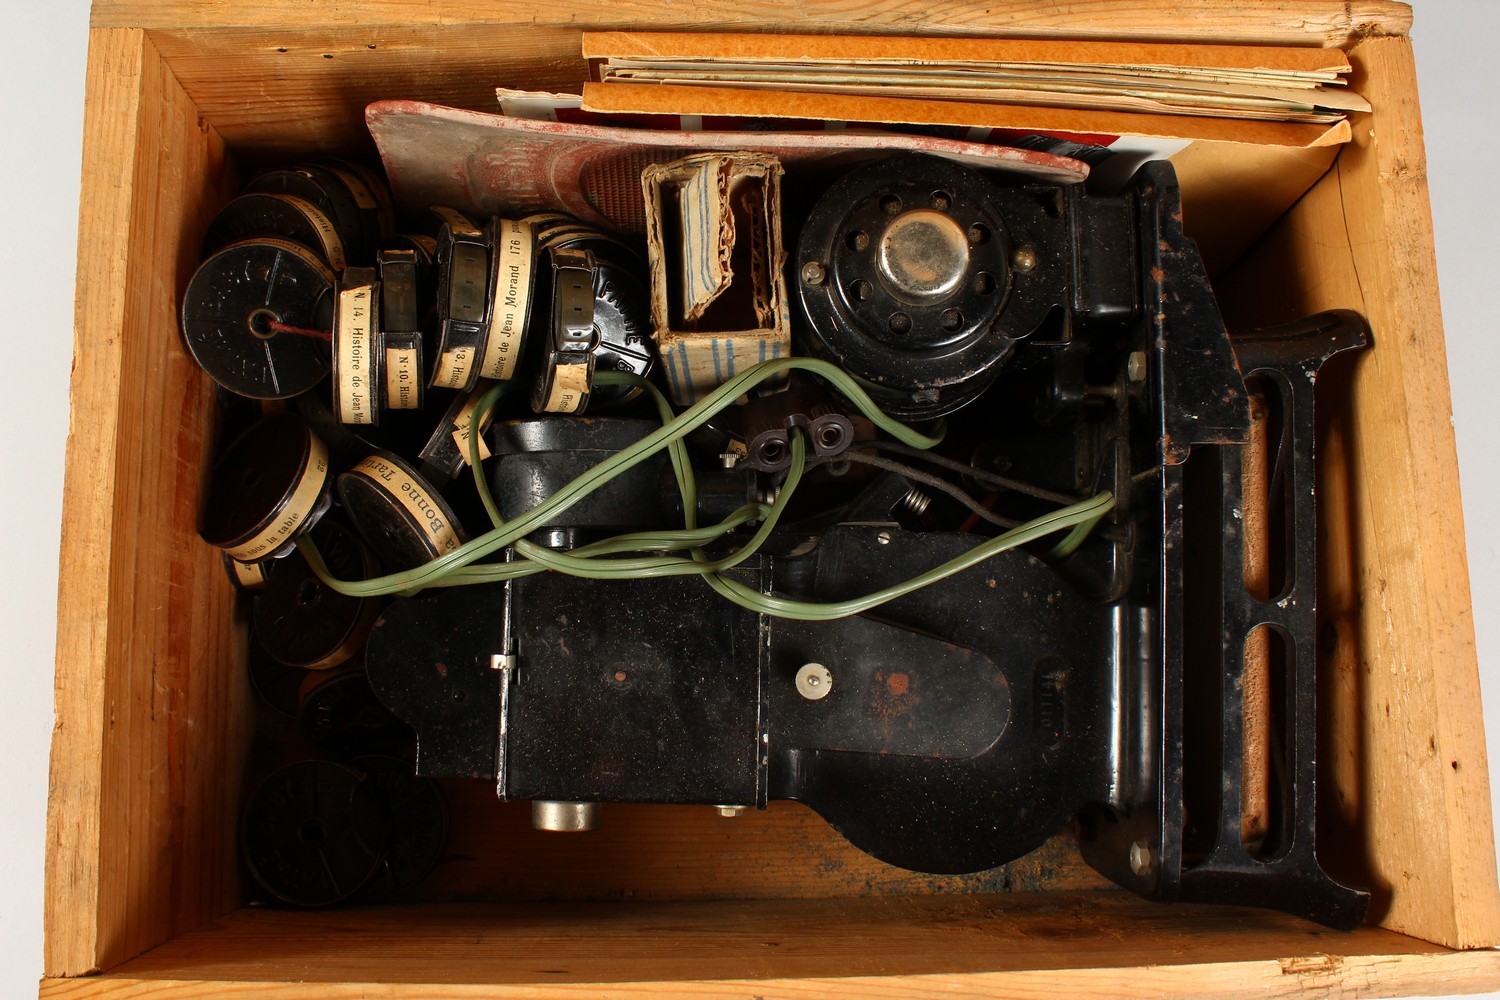 AN EARLY ELECTRIC FILM PROJECTOR, with a quantity of film rolls. - Image 3 of 4